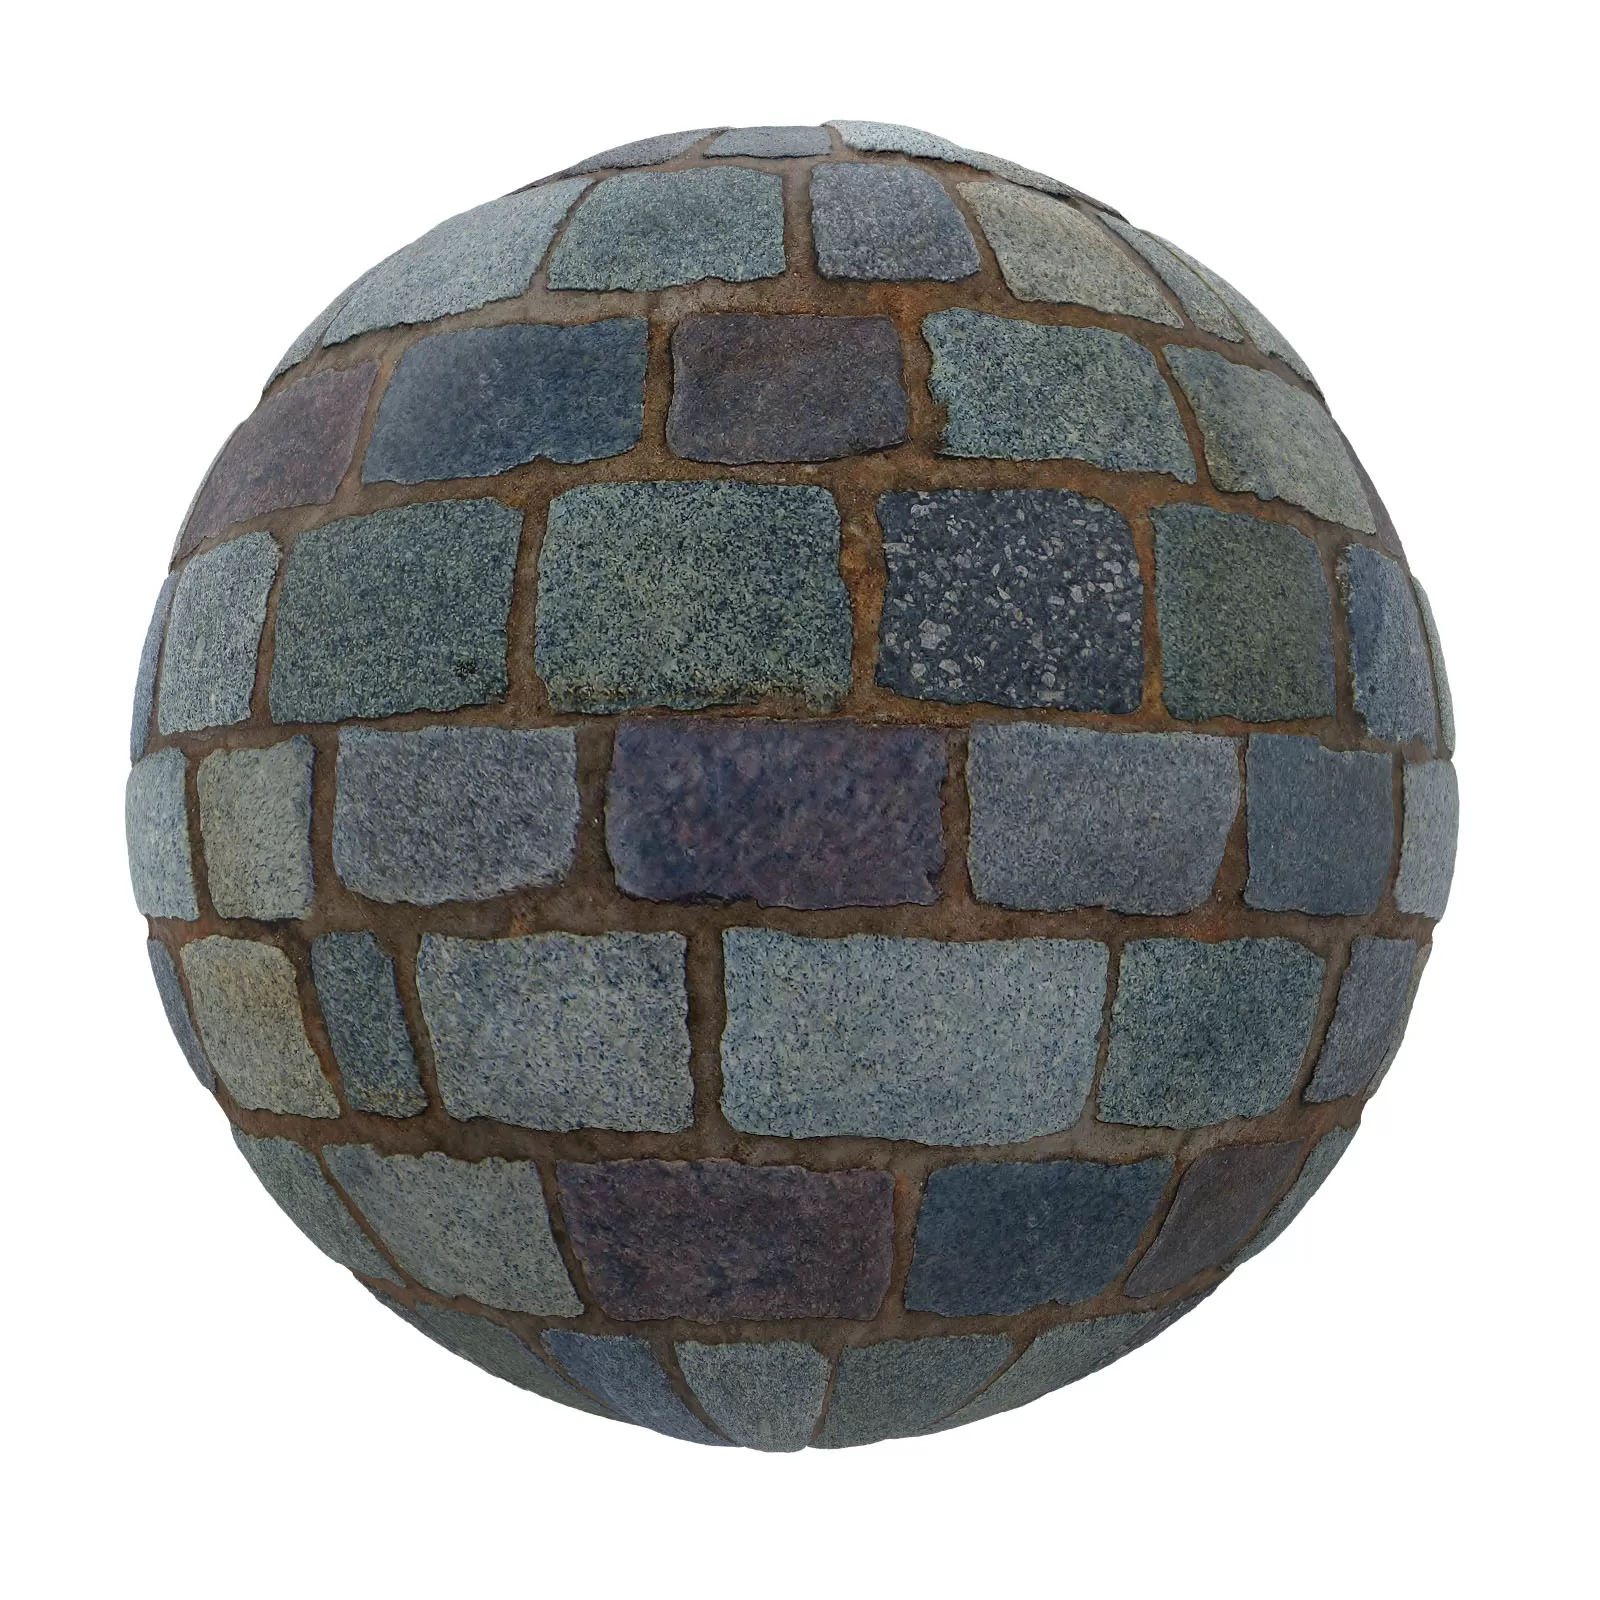 PBR CGAXIS TEXTURES – PAVEMENTS – Blue Stone Pavement